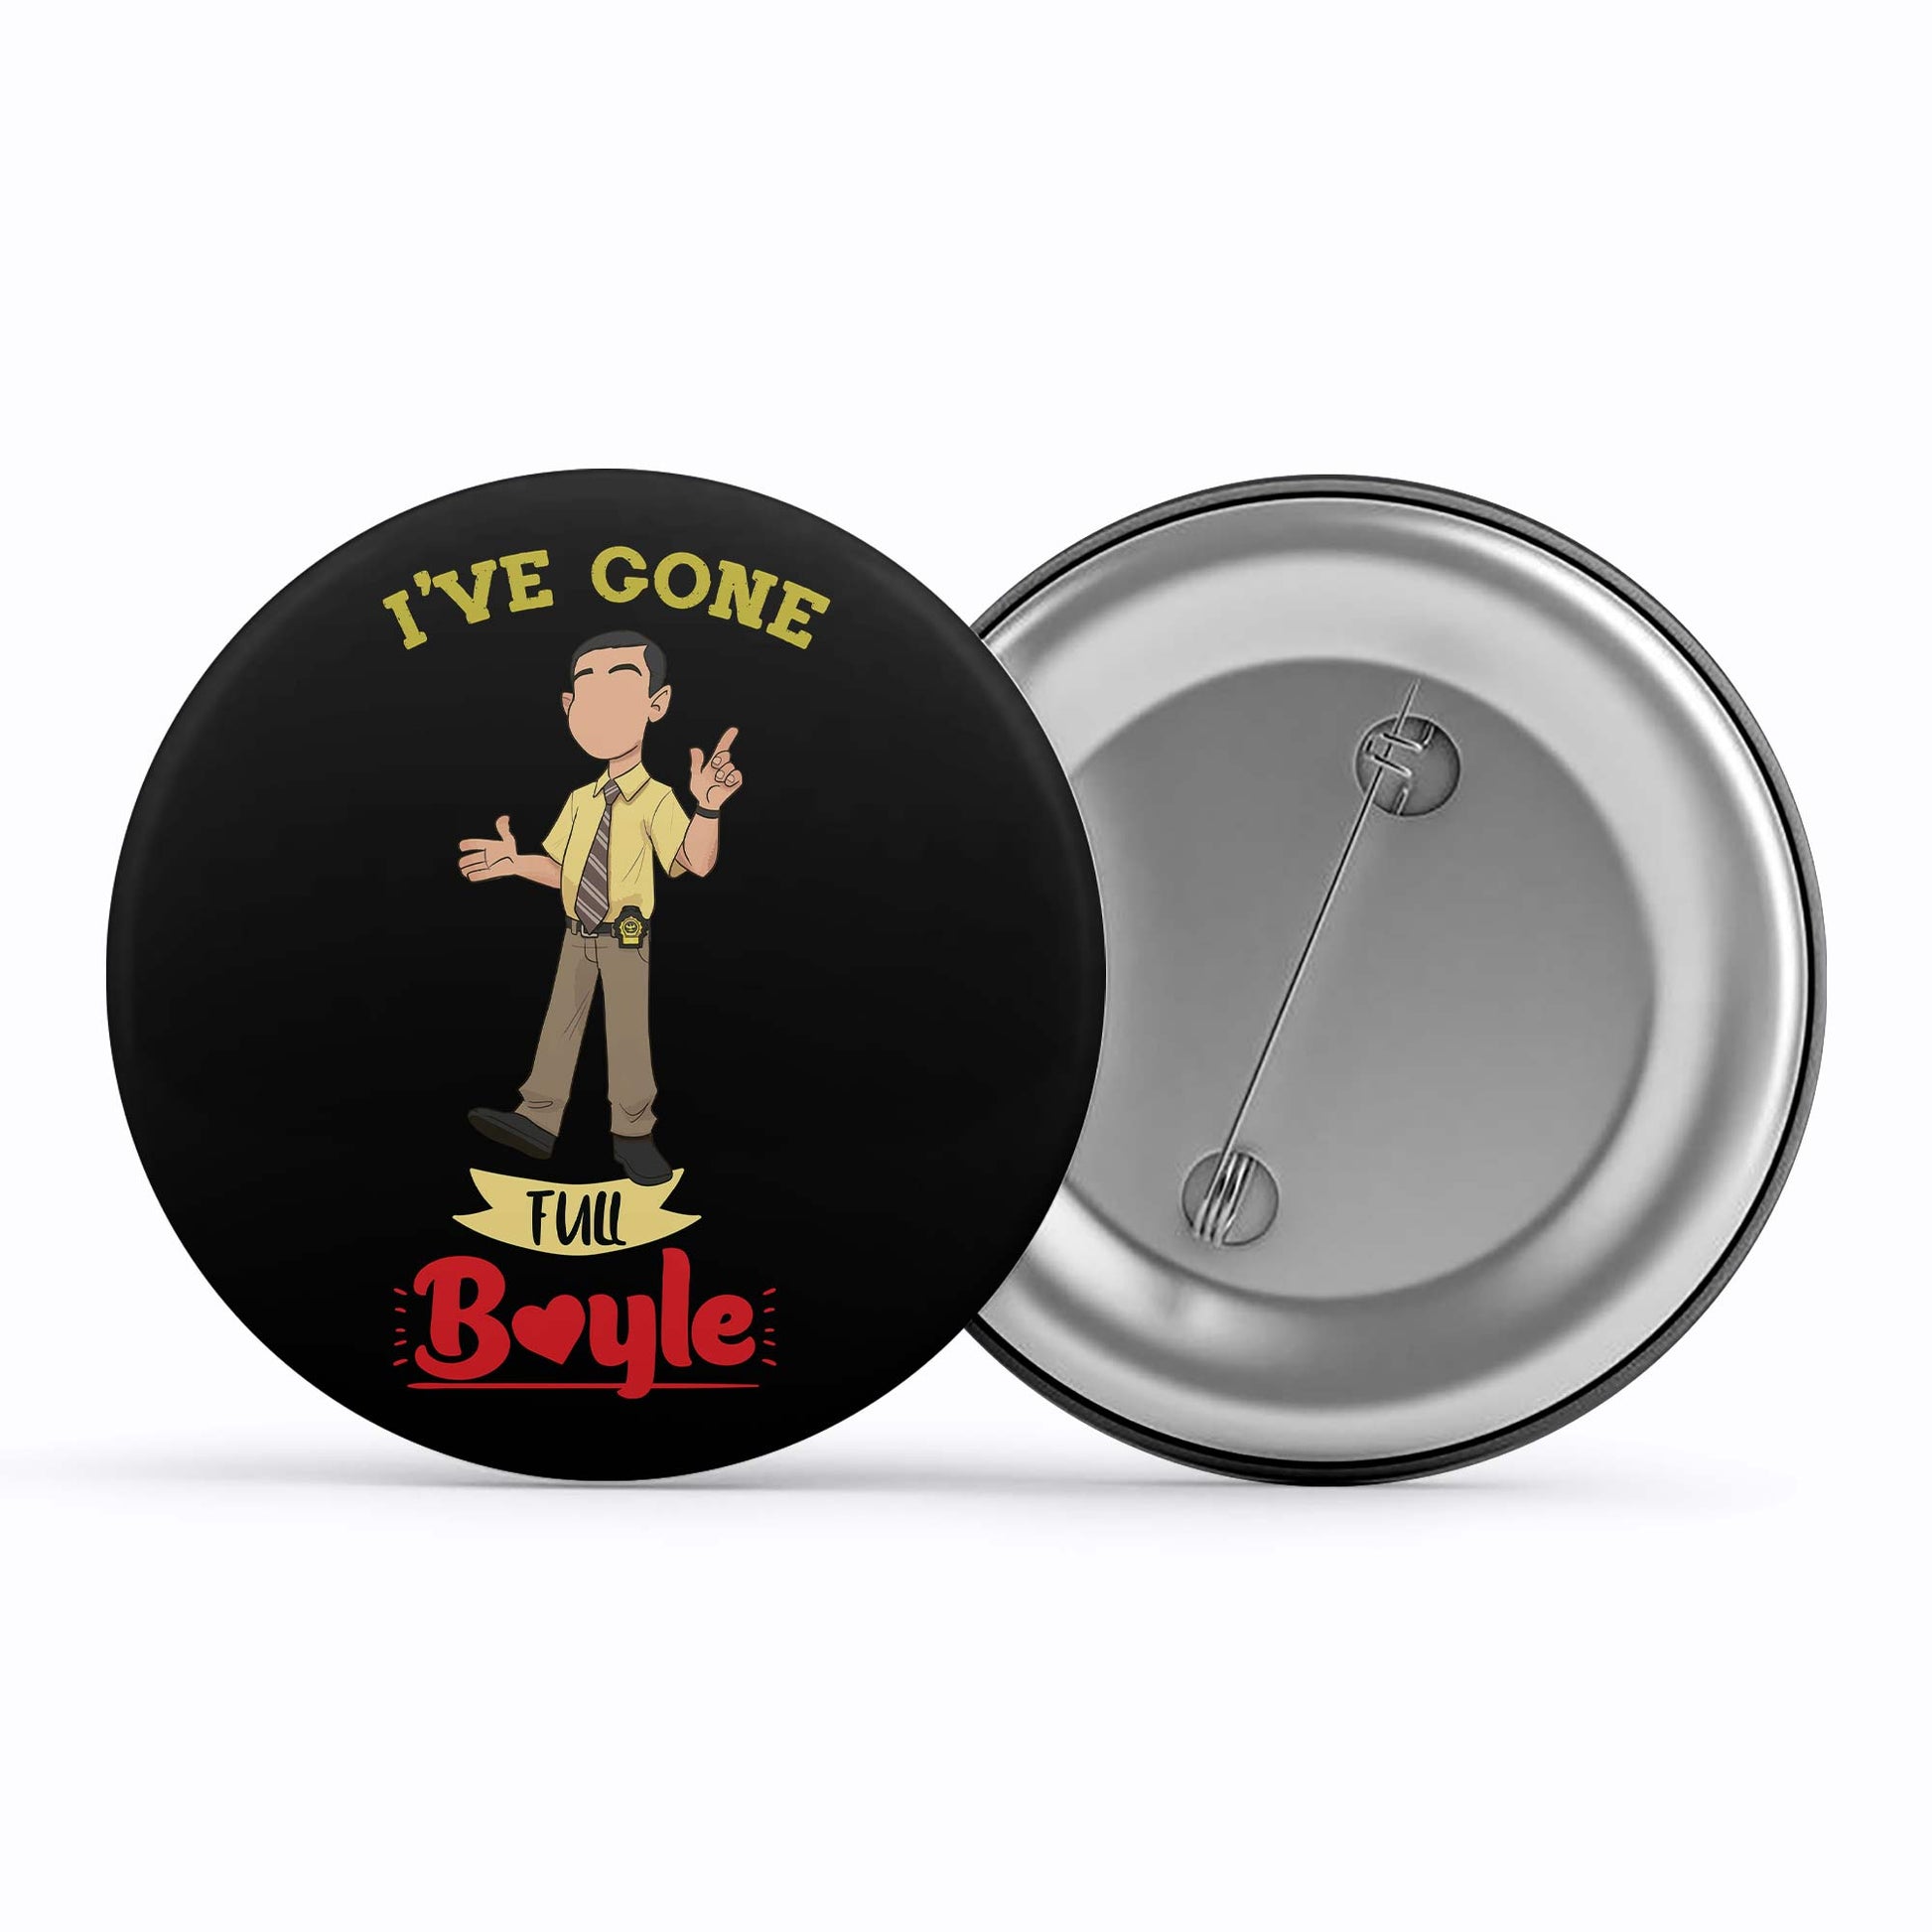 brooklyn nine-nine gone full boyle badge pin button buy online india the banyan tee tbt men women girls boys unisex  detective jake peralta terry charles boyle gina linetti andy samberg merchandise clothing acceessories